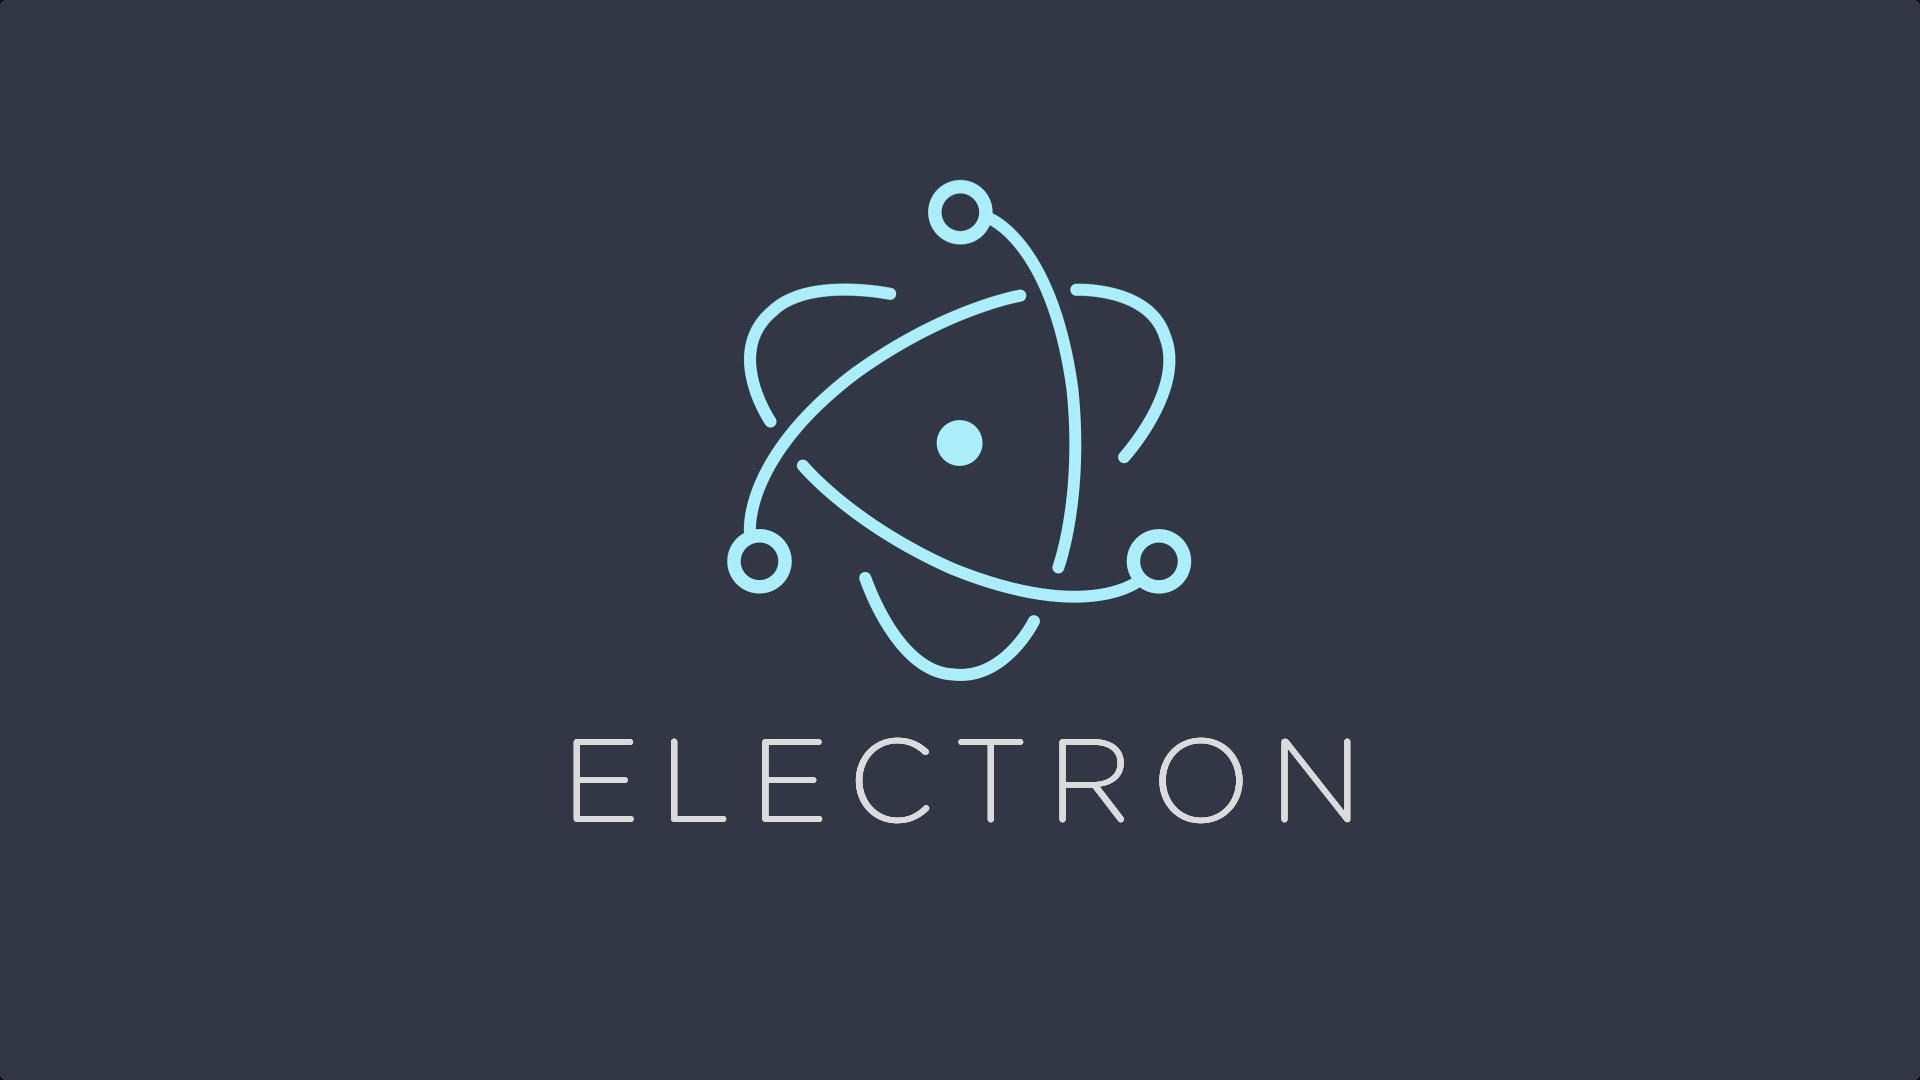 Apps created in Electron are being rejected by Apple